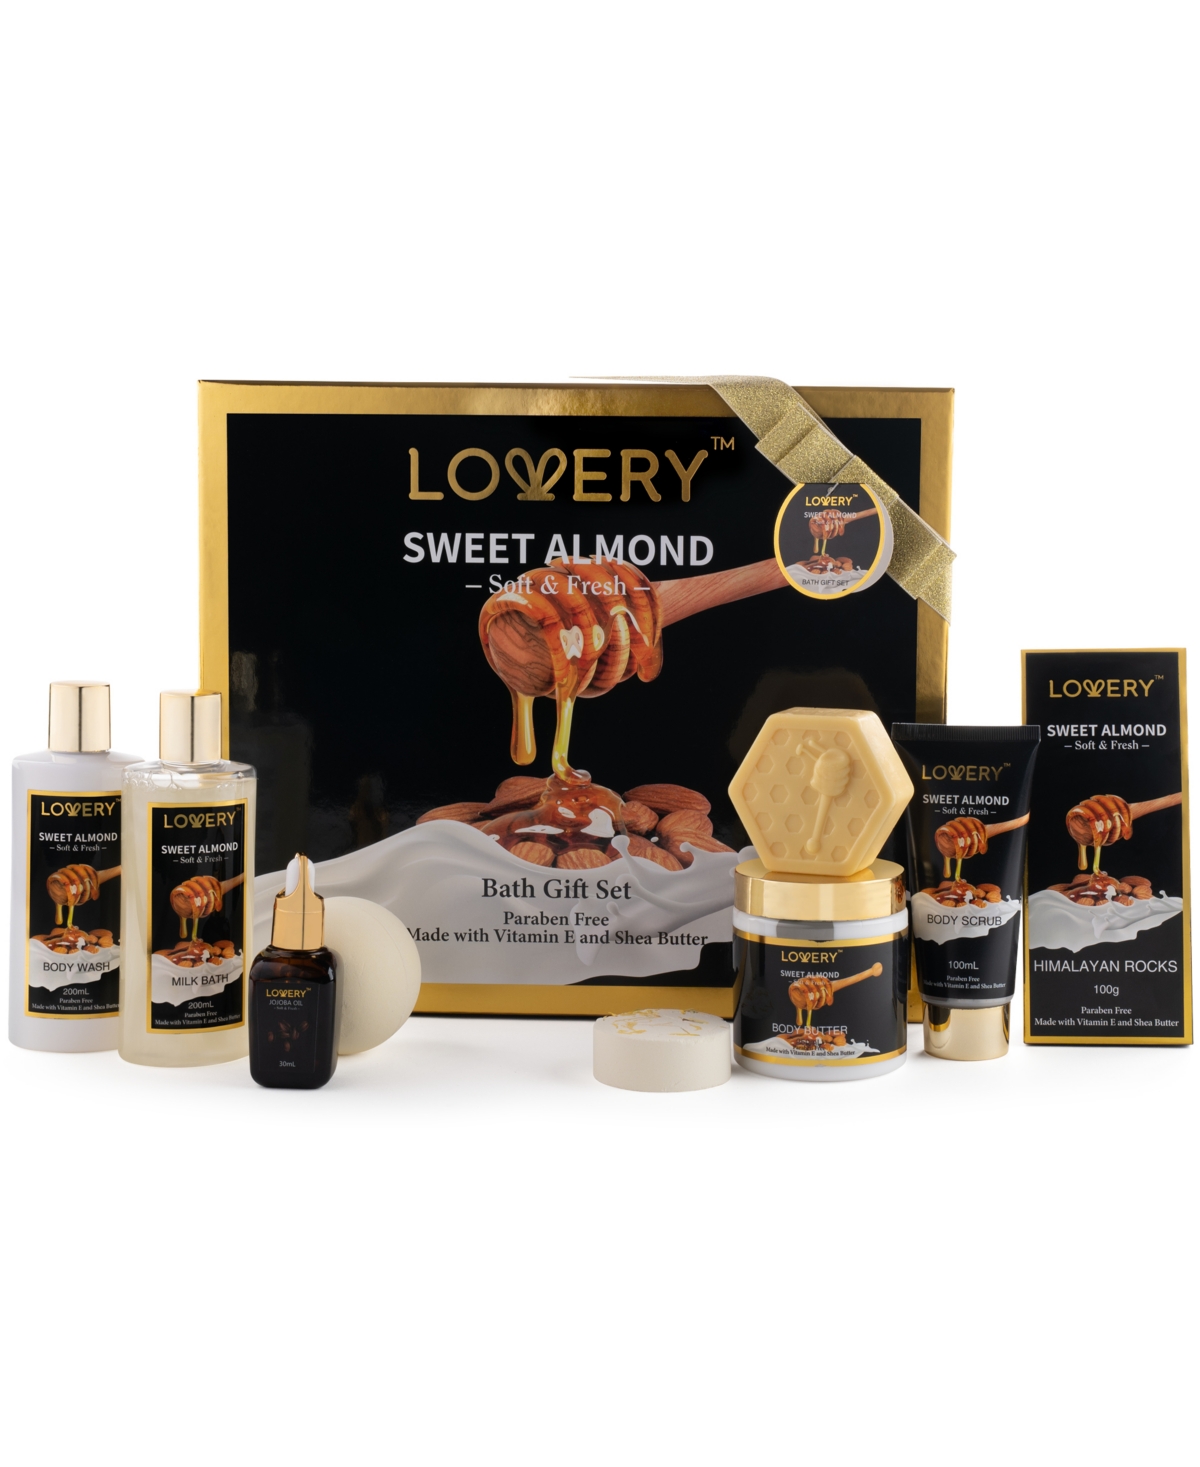 Lovery Sweet Almond Bath Gift Spa Set, Relaxing Body Care Gift, 10 Piece